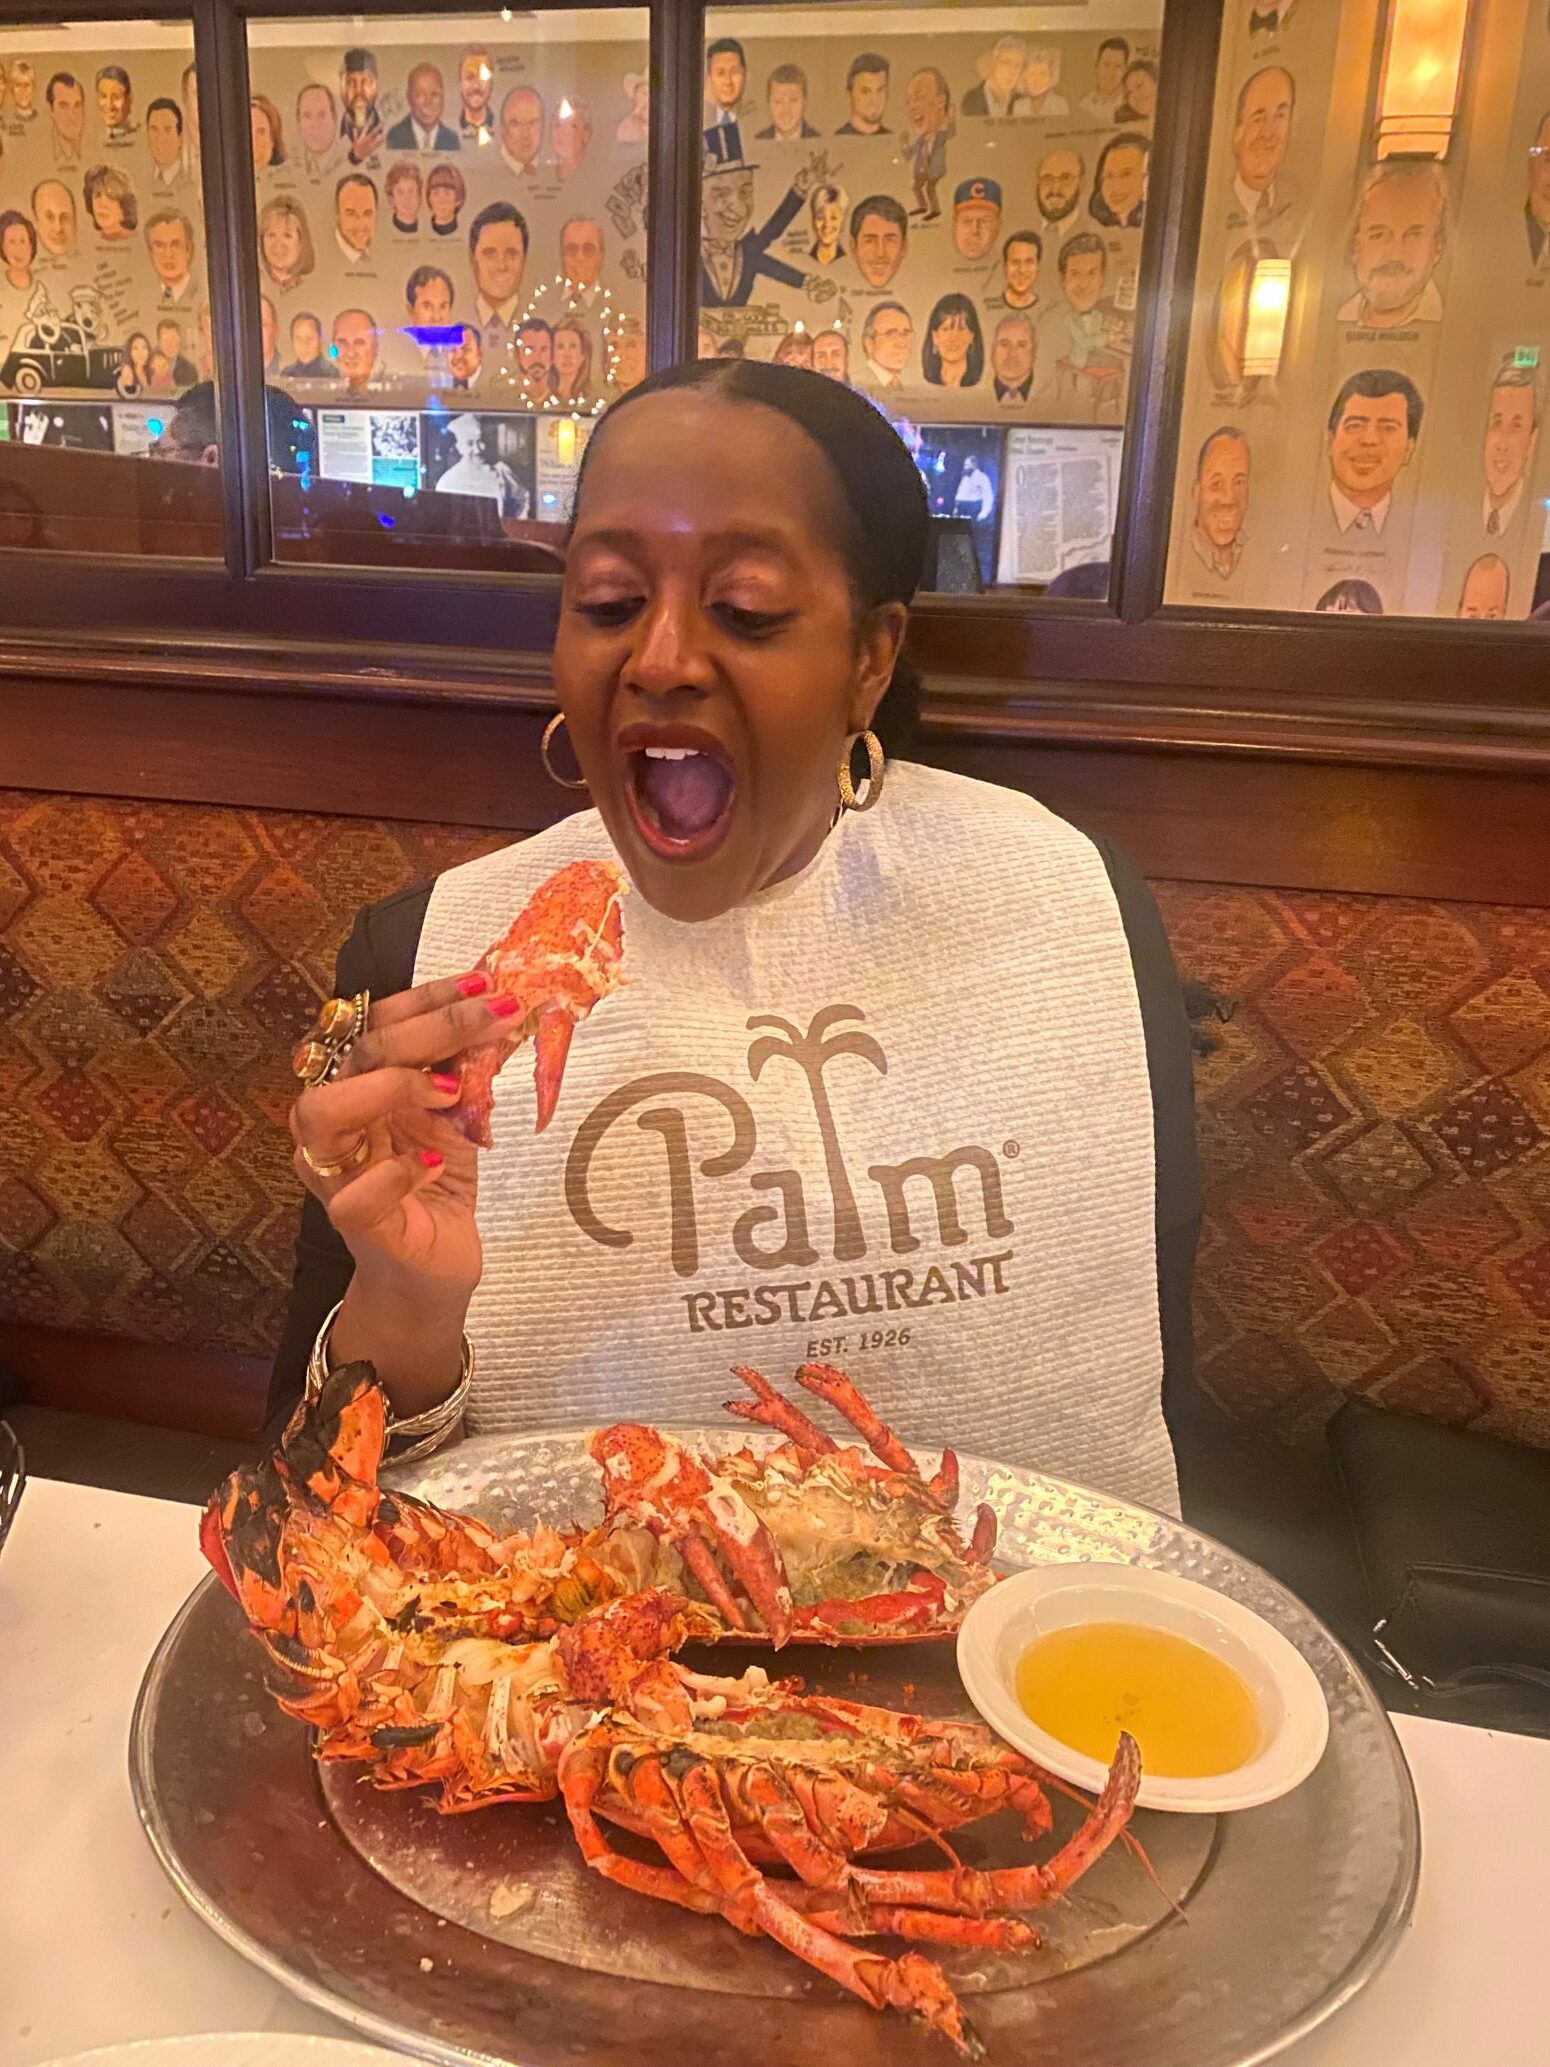 An image of lifestyle blogger Ariel eating a lobster from The Palm.